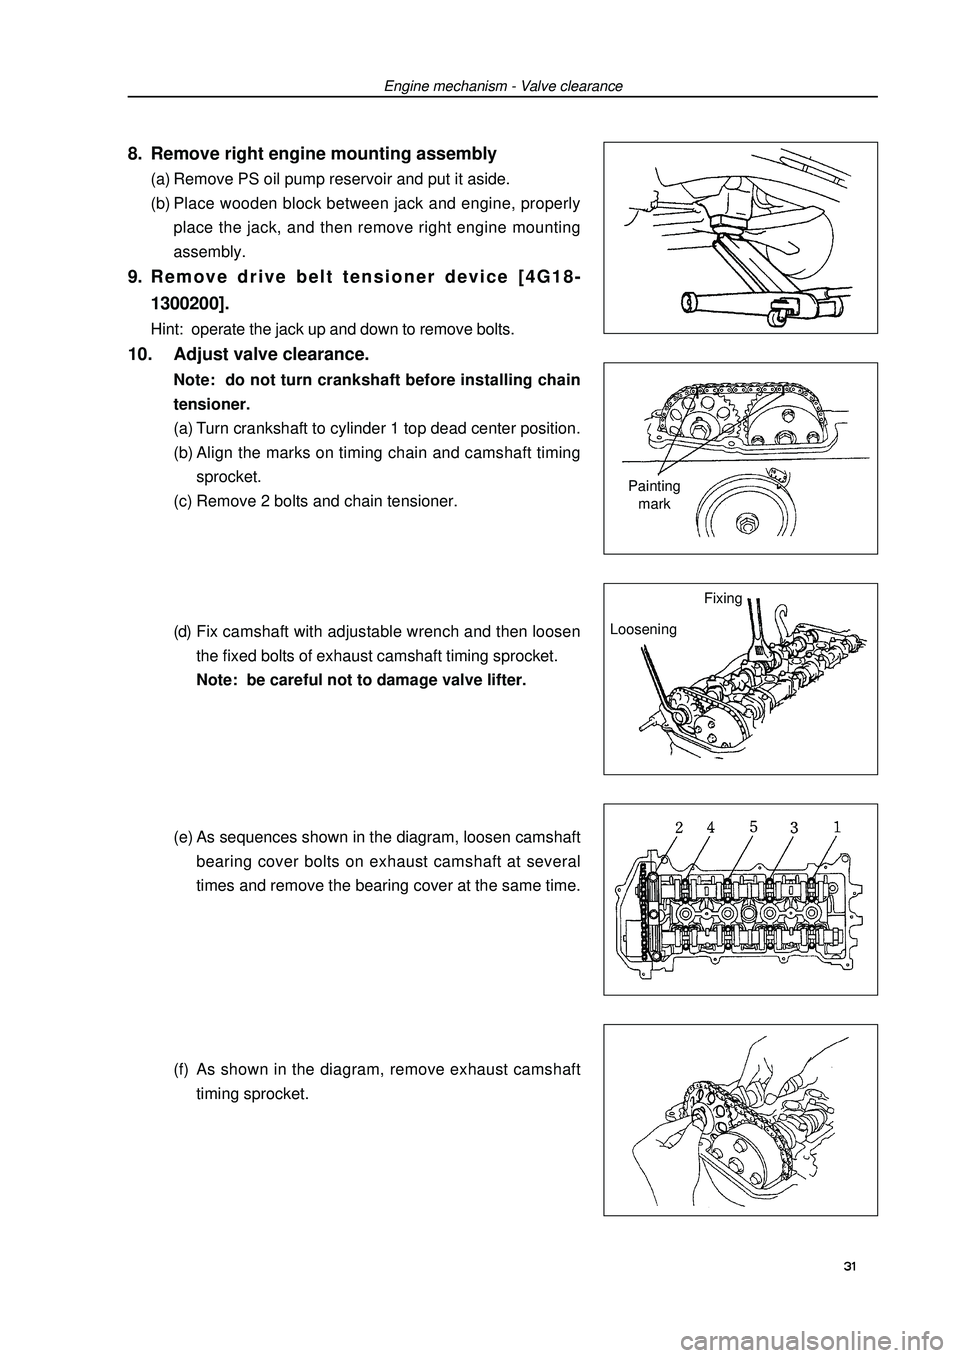 GEELY FC 2008 Service Manual Engine mechanism - Valve clearance8. Remove right engine mounting assembly(a) Remove PS oil pump reservoir and put it aside.
(b) Place wooden block between jack and engine, properly
place the jack, an